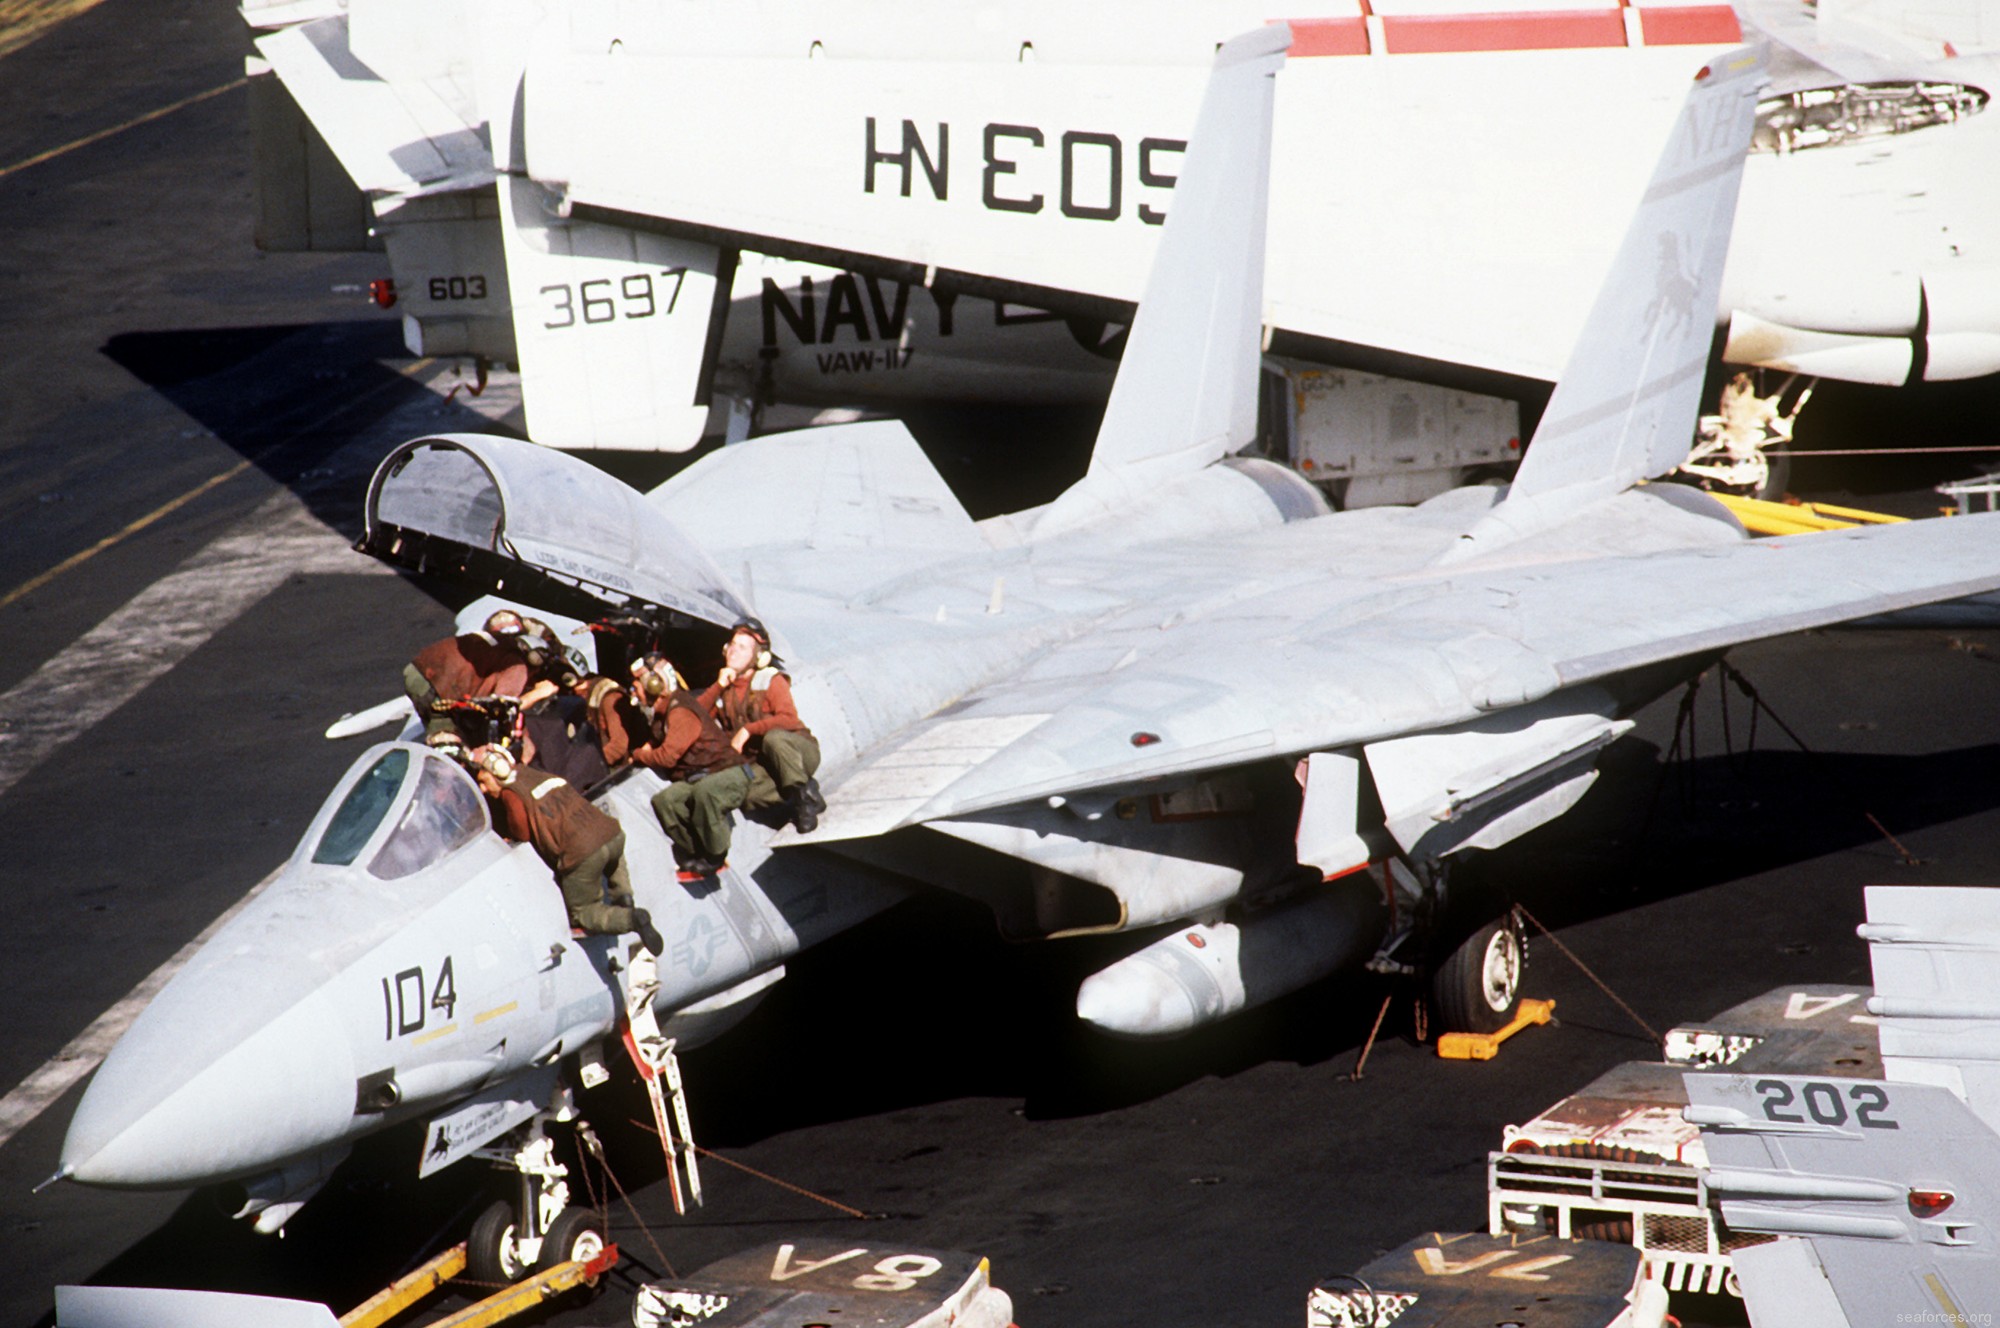 vf-213 black lions fighter squadron us navy f-14a tomcat carrier air wing cvw-11 uss abraham lincoln cvn-72 71